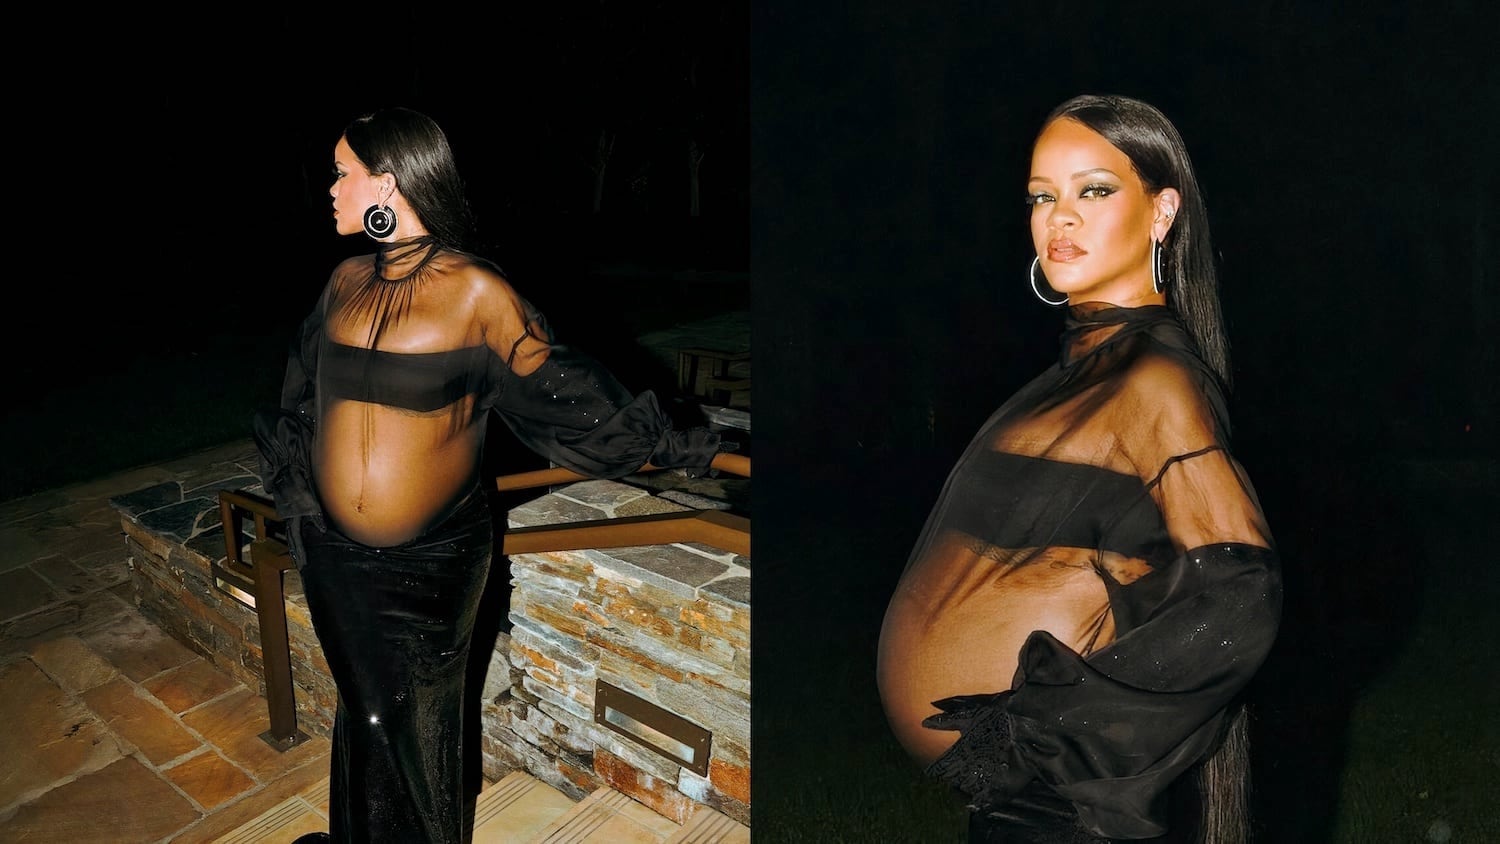 Rihanna Flaunts Her Baby Bump In Sheer Dress At Oscars 2022 Afterparty